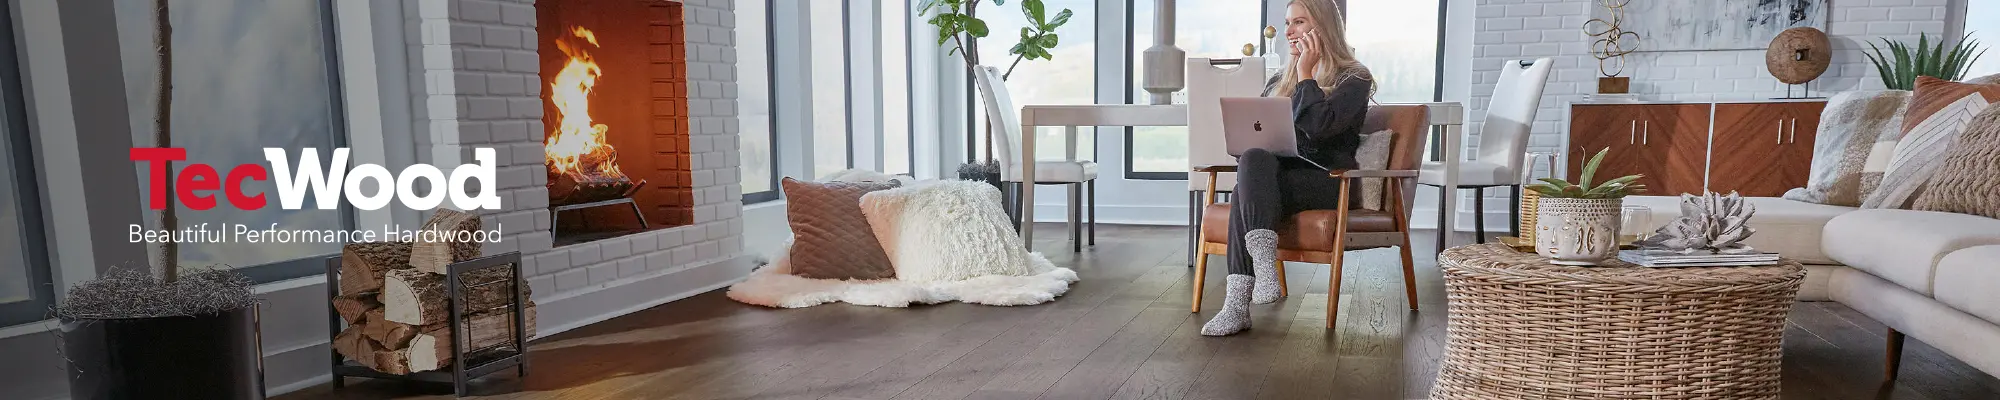 Browse Mohawk TecWood products from Pandolfi House of Carpets & Flooring in Springfield, PA